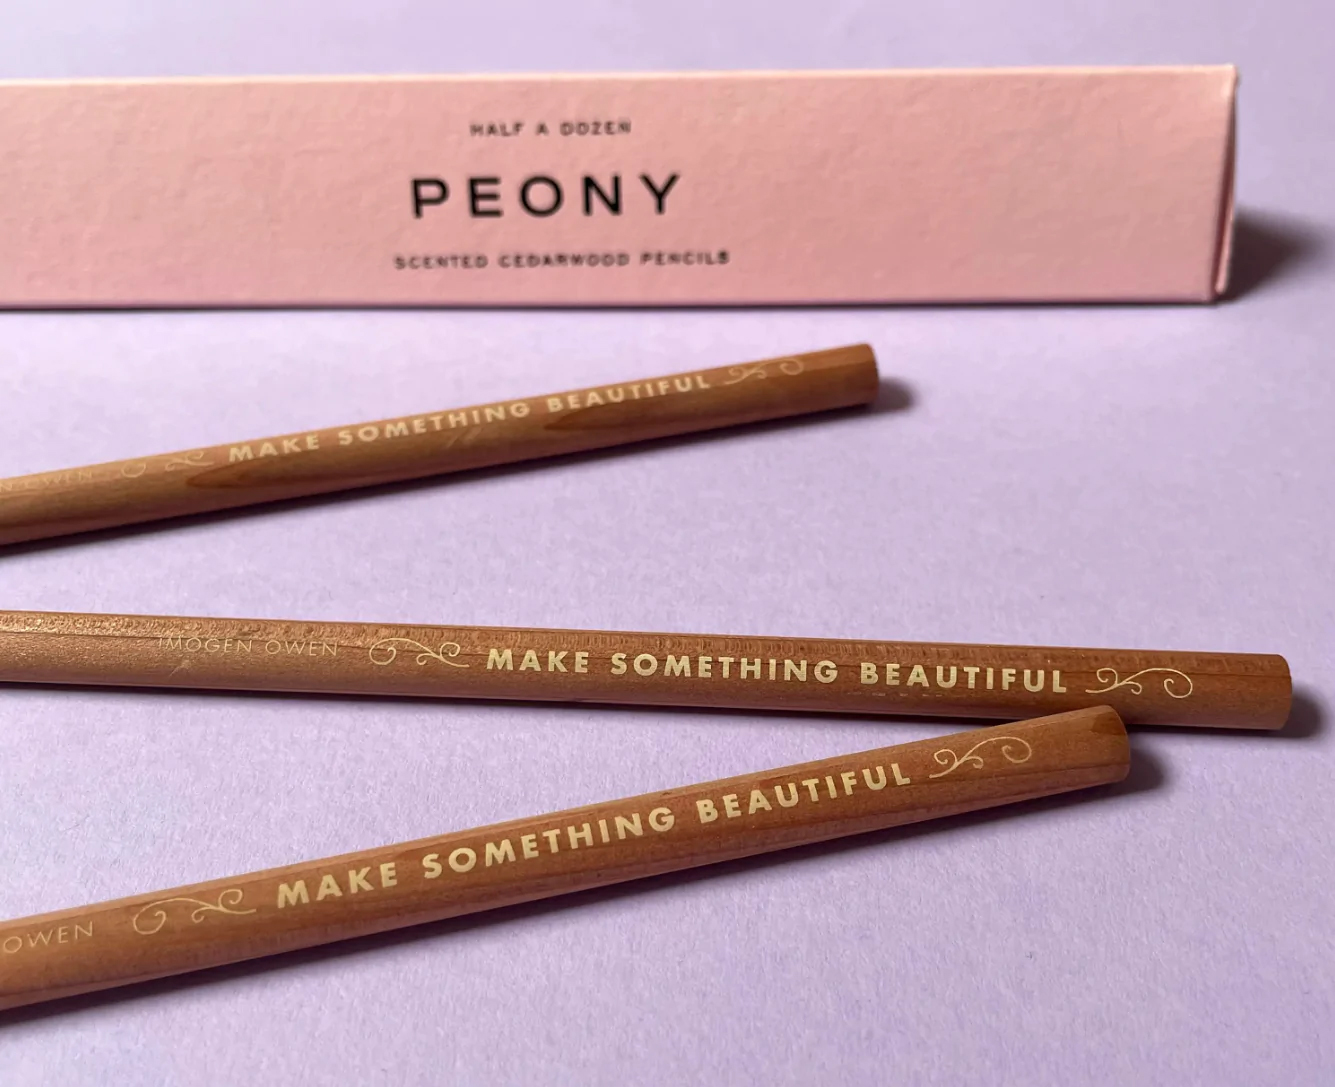 Wooden pencils inscribed with "Make something beautiful"